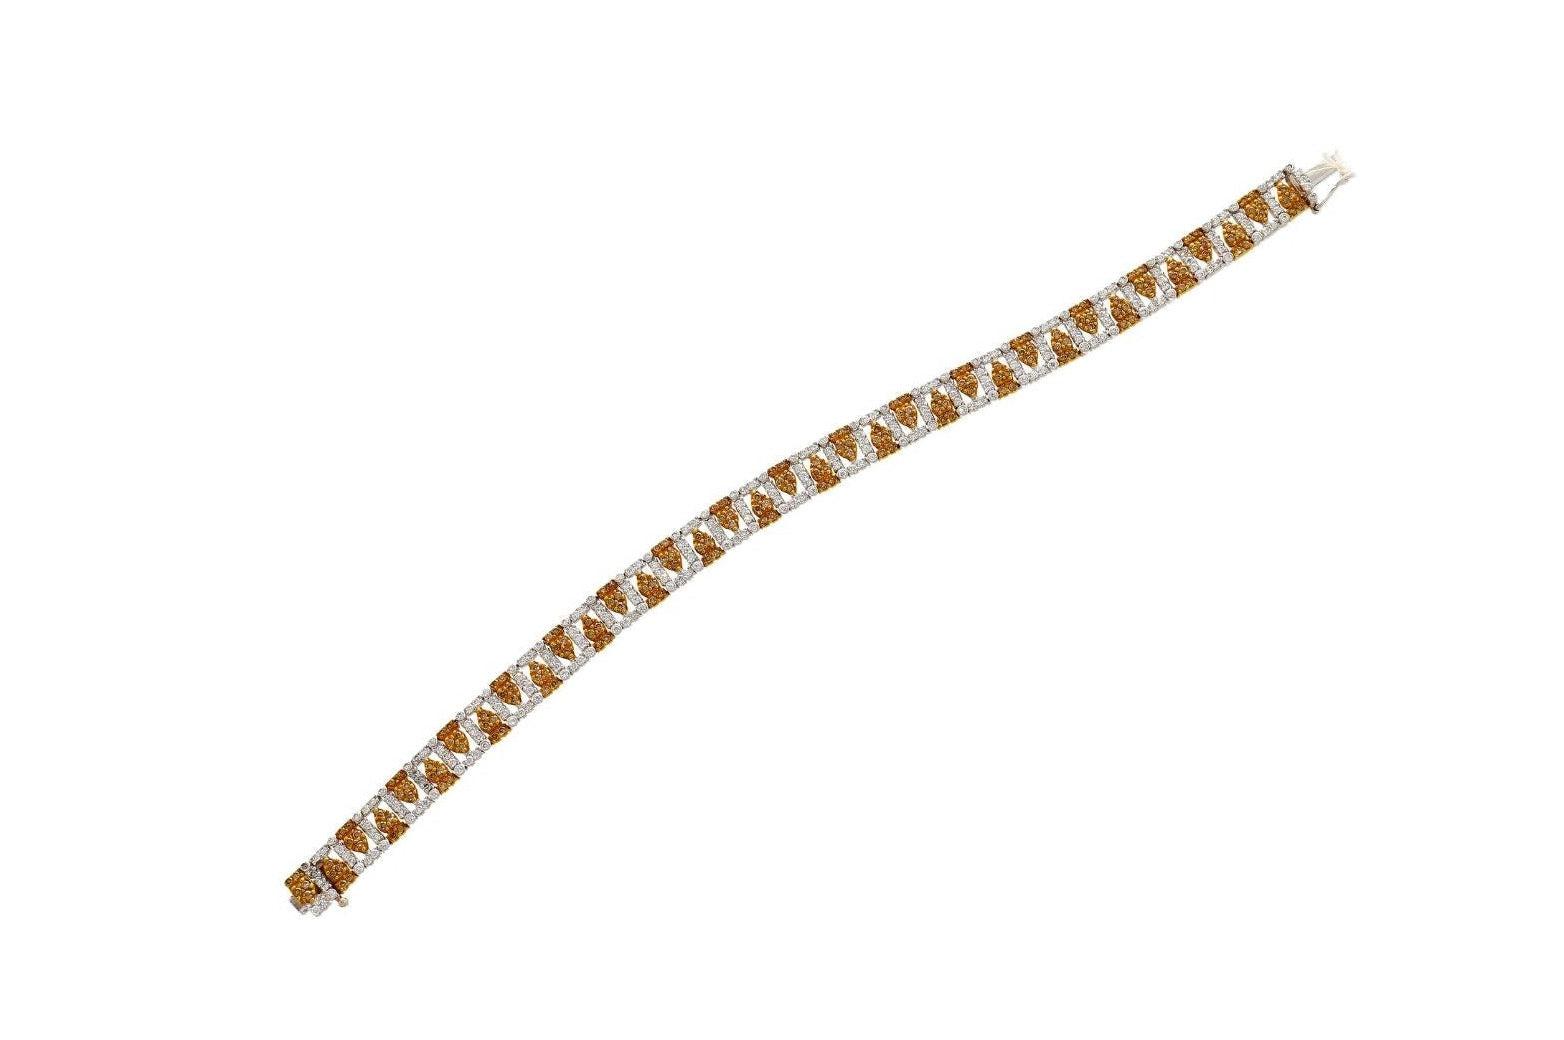 3_22-Carat-TW-Fancy-Brown-and-White-Diamonds-in-Patterned-18K-White-and-Yellow-Gold-Bracelet-7-inches-Bracelet-2.jpg